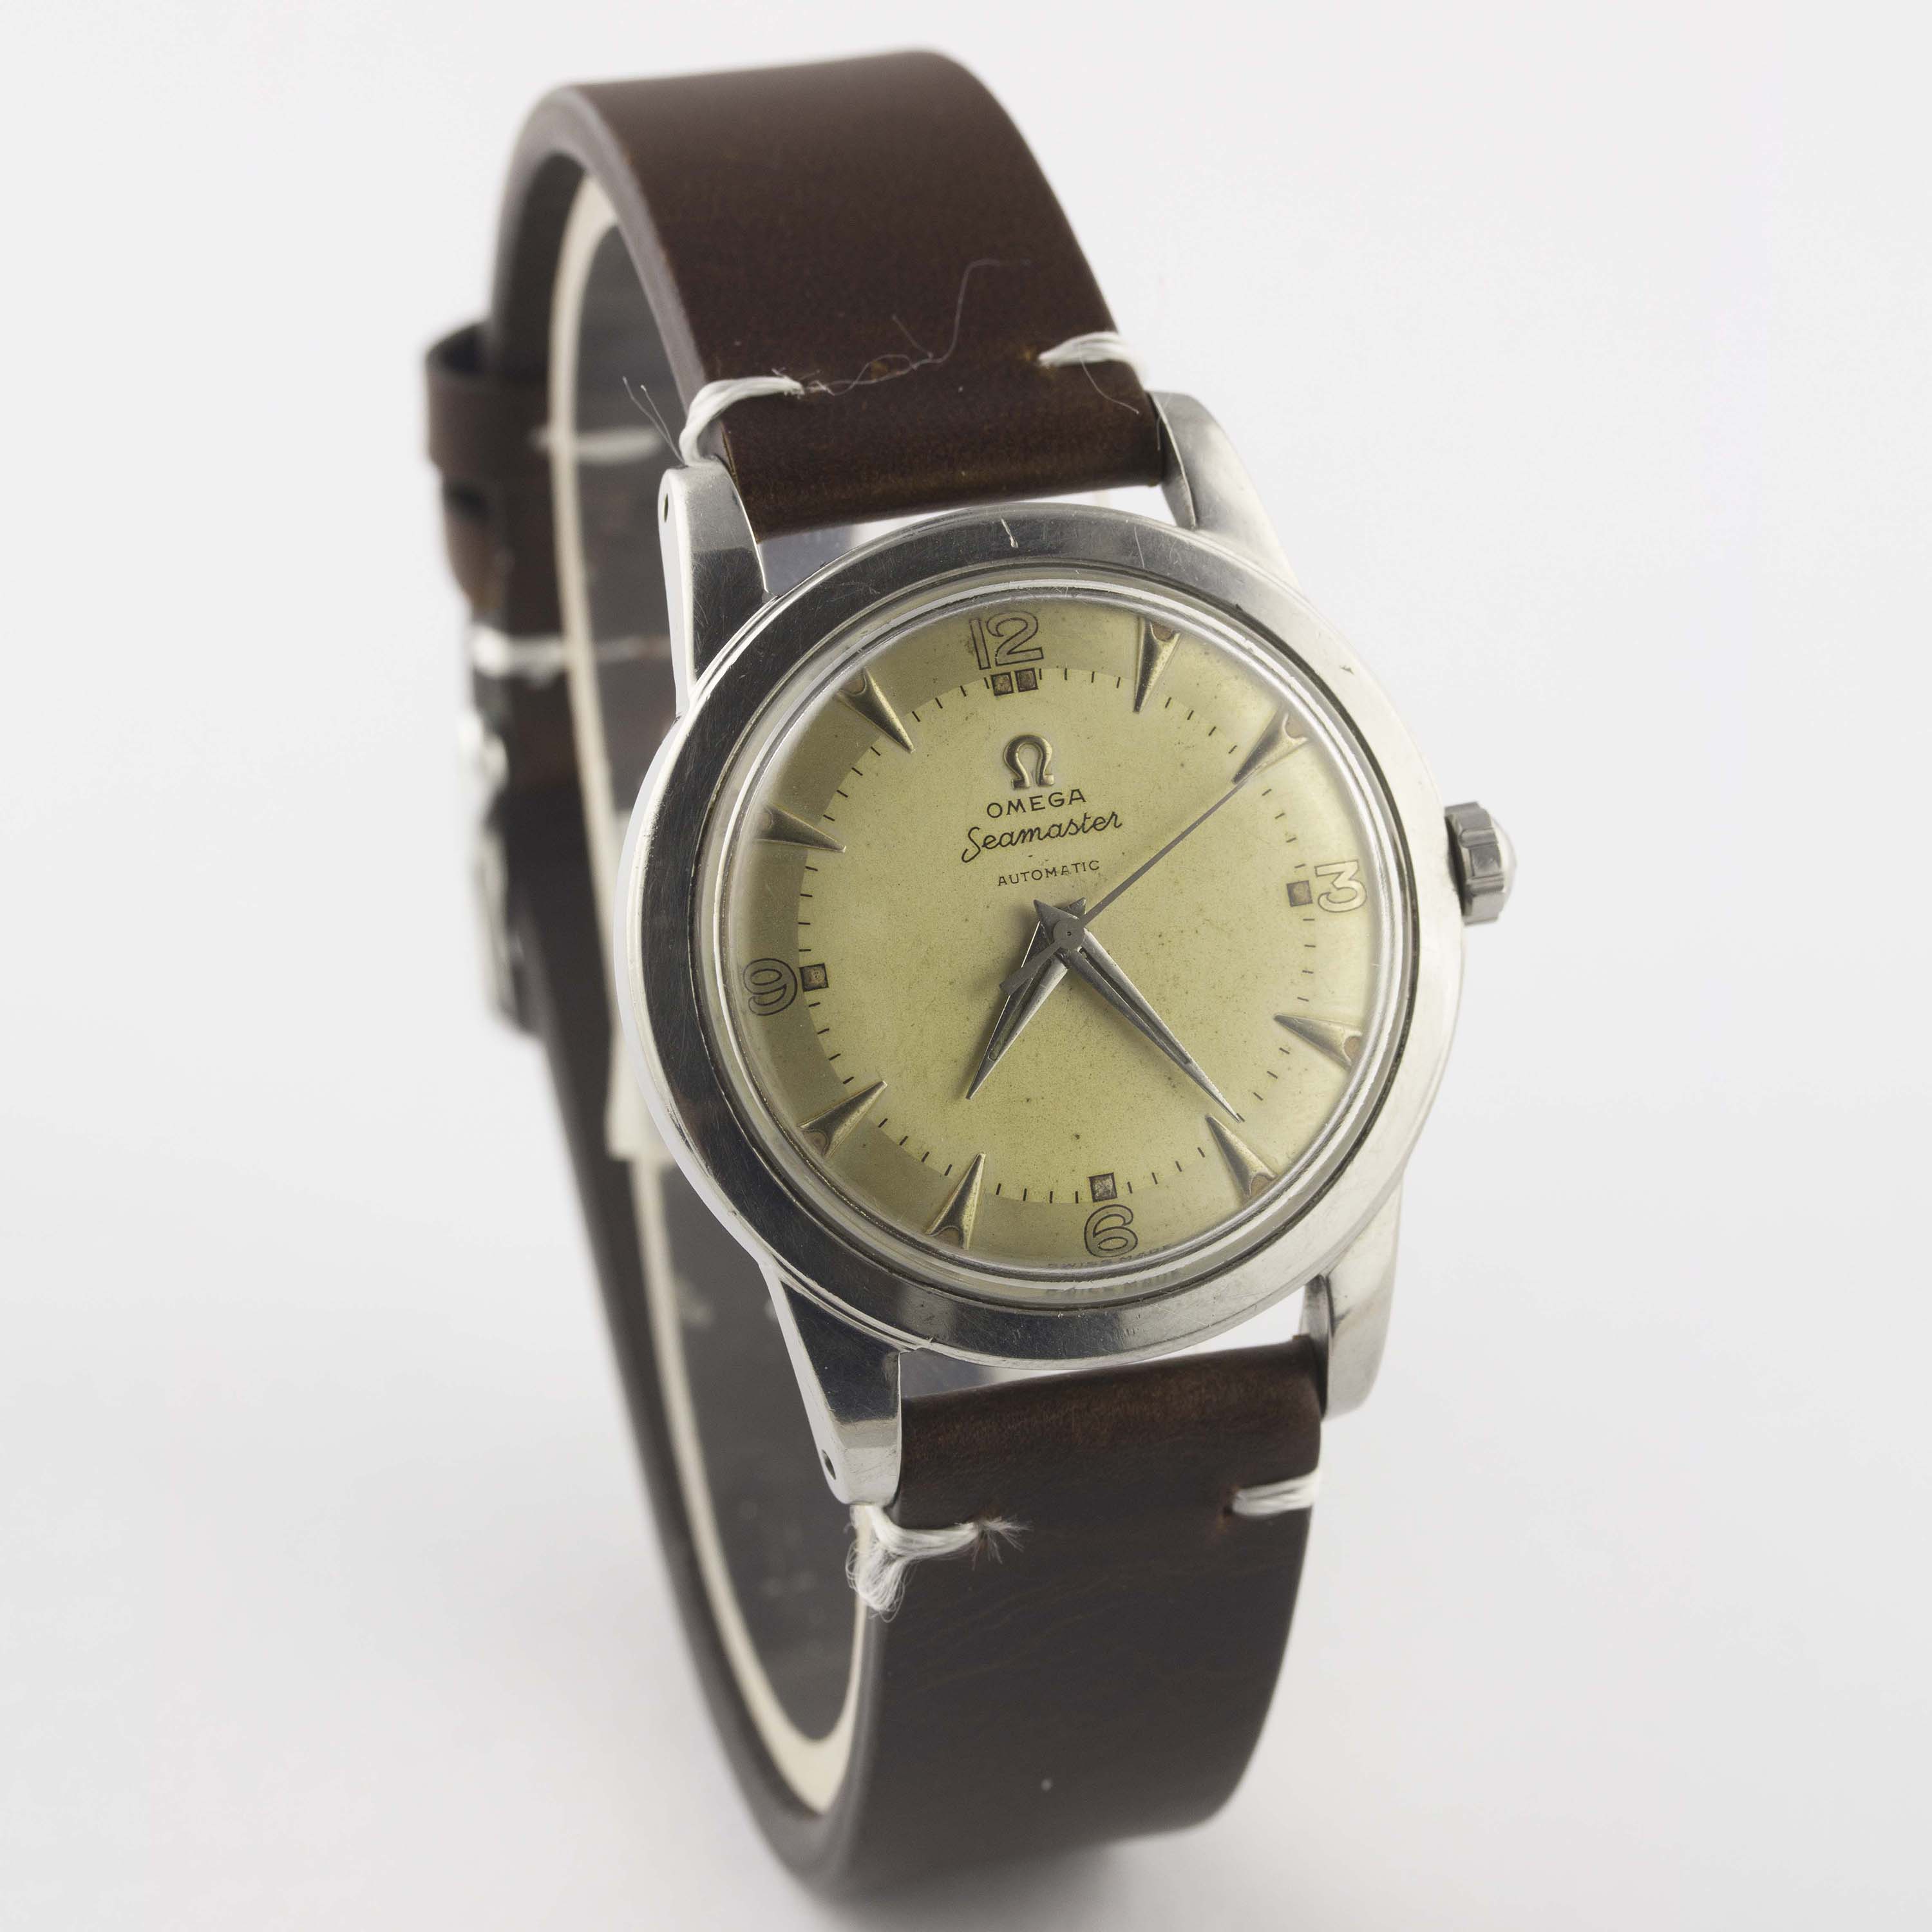 A GENTLEMAN'S STAINLESS STEEL OMEGA SEAMASTER AUTOMATIC WRIST WATCH CIRCA 1951, REF. C2577-2 WITH - Image 5 of 10